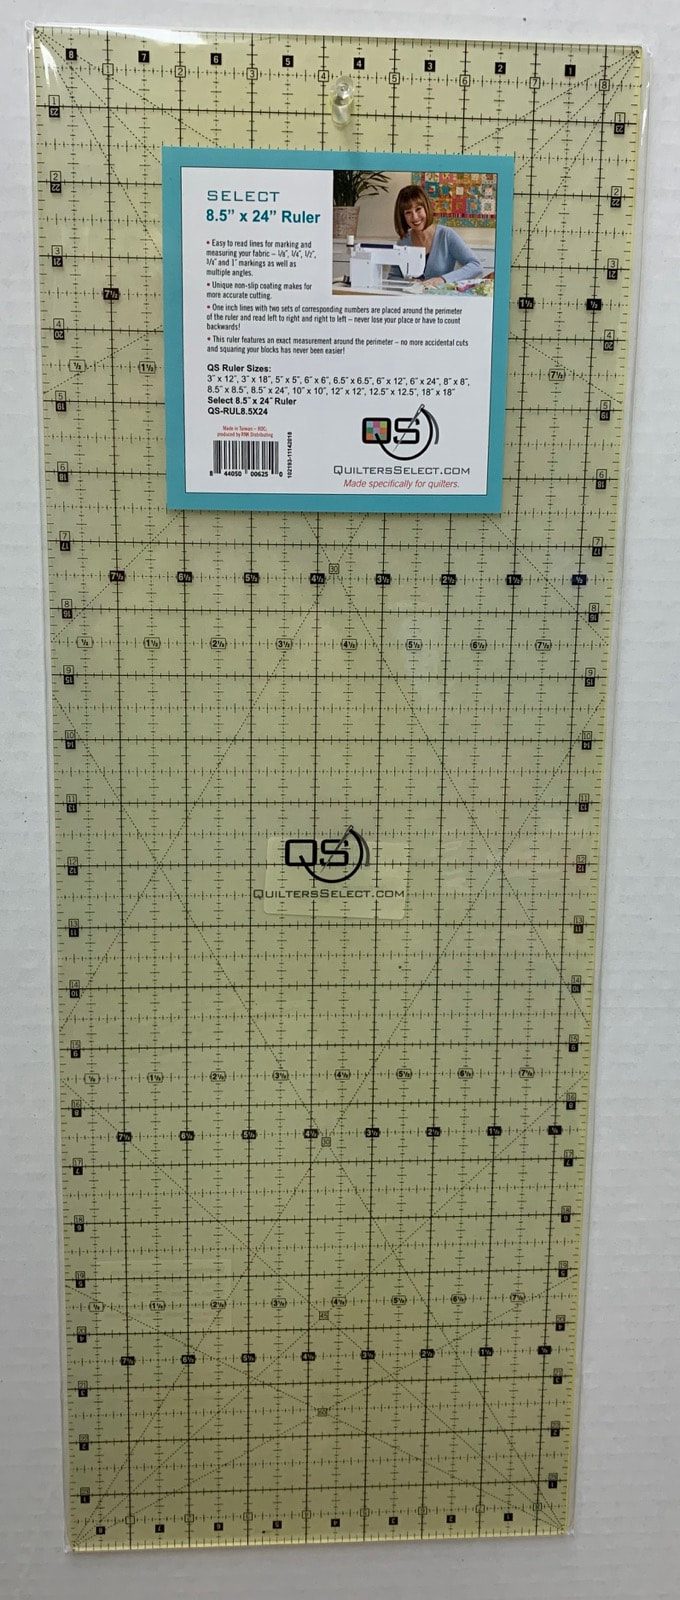 Quilters Select 8.5" x 24" Ruler